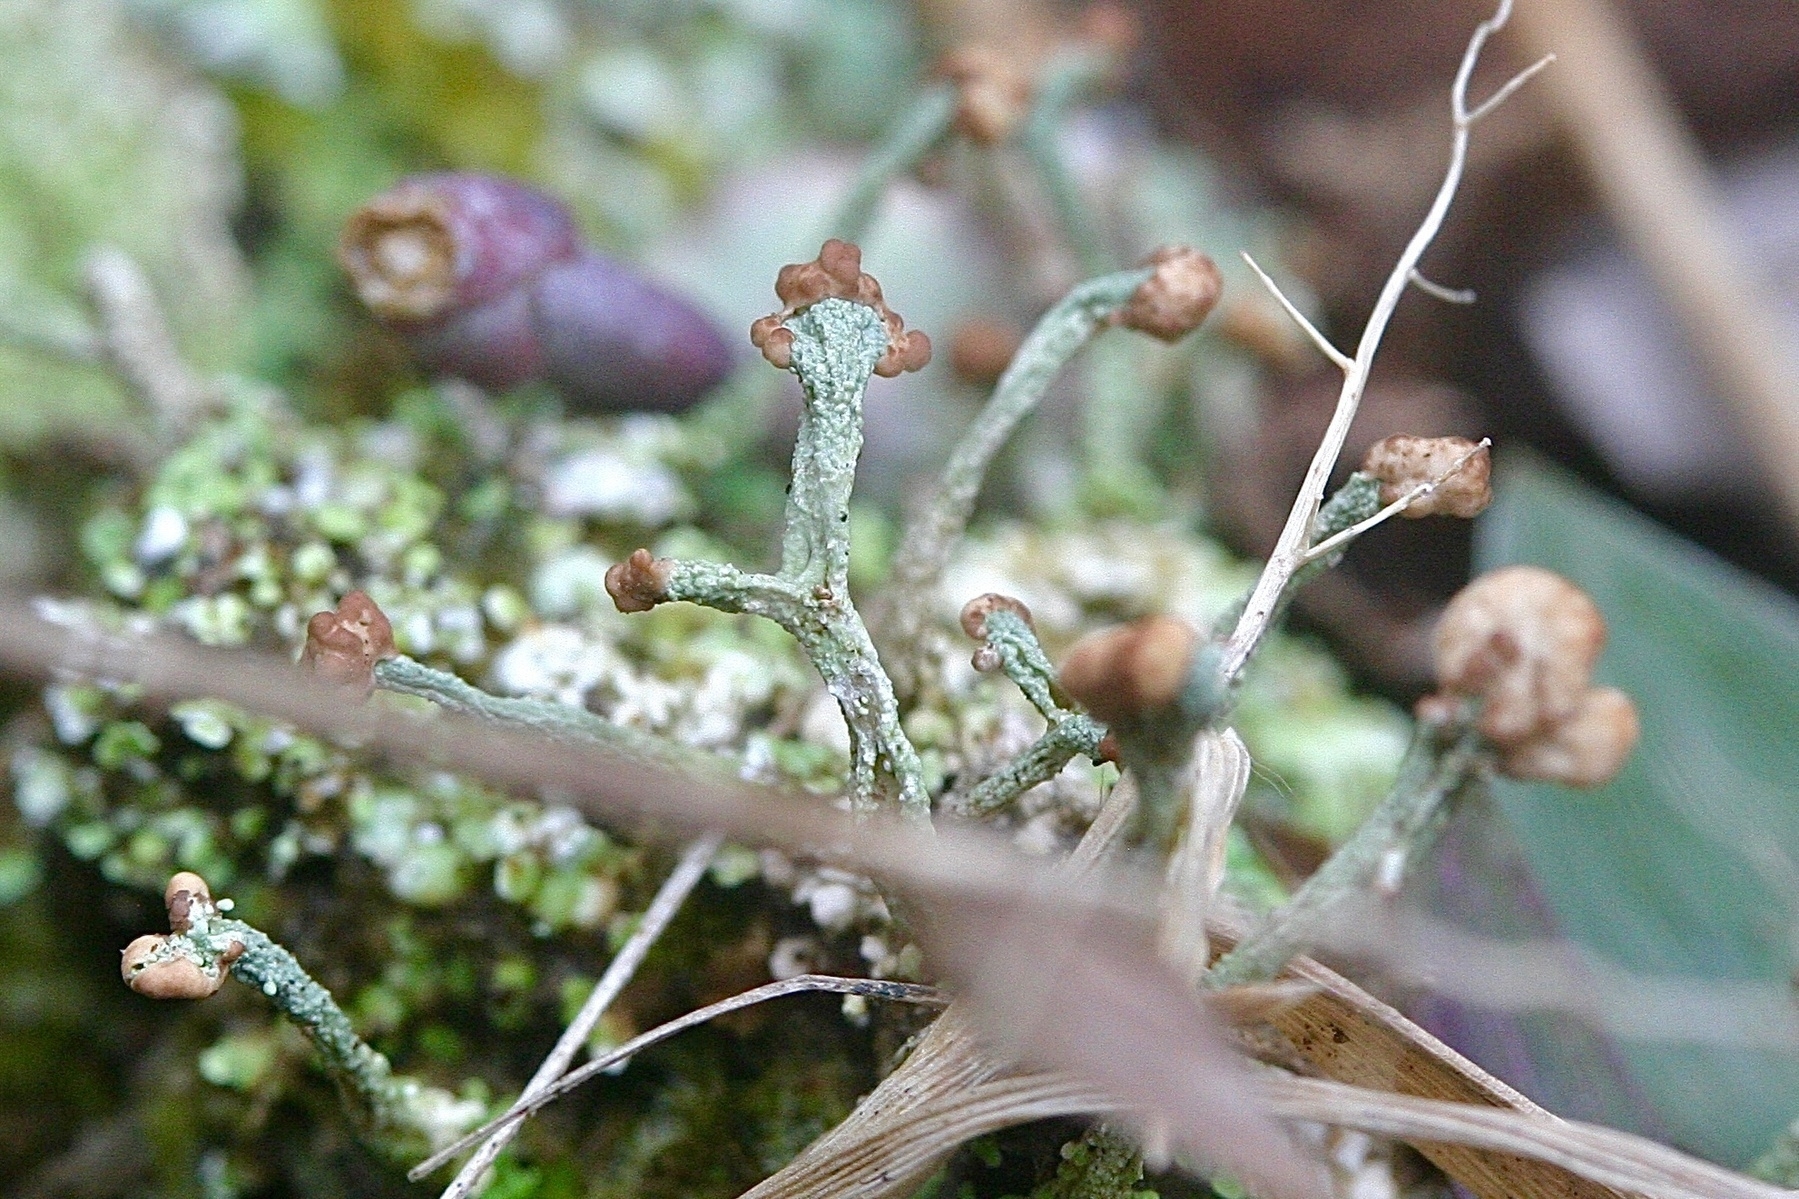 Branching pale green lichens topped with brownish tan nodules